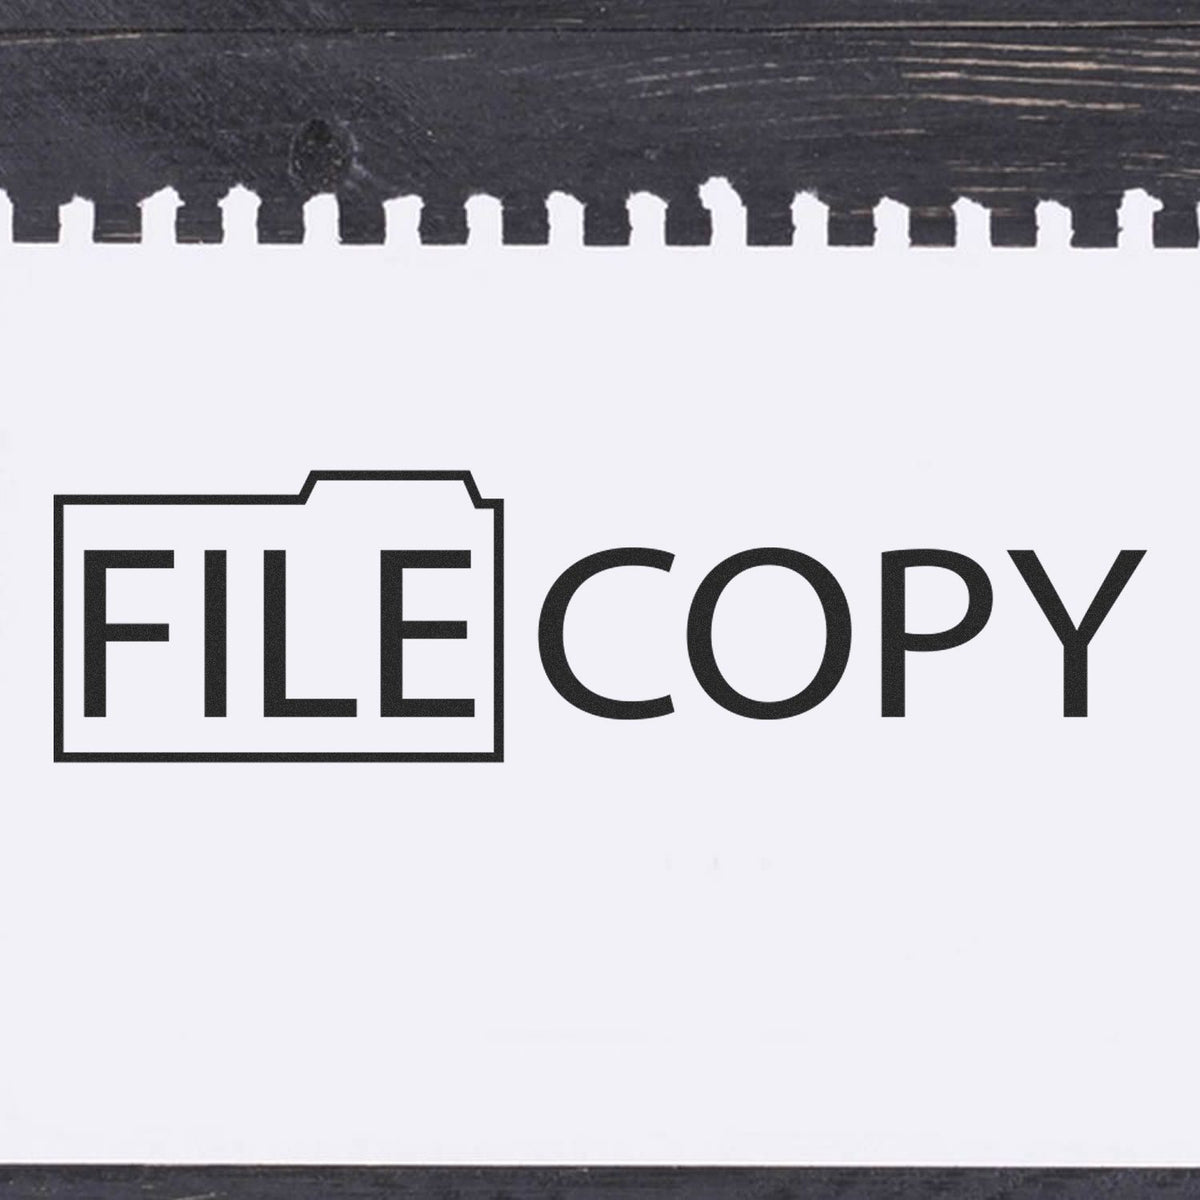 Self-Inking File Copy with Folder Stamp Lifestyle Photo